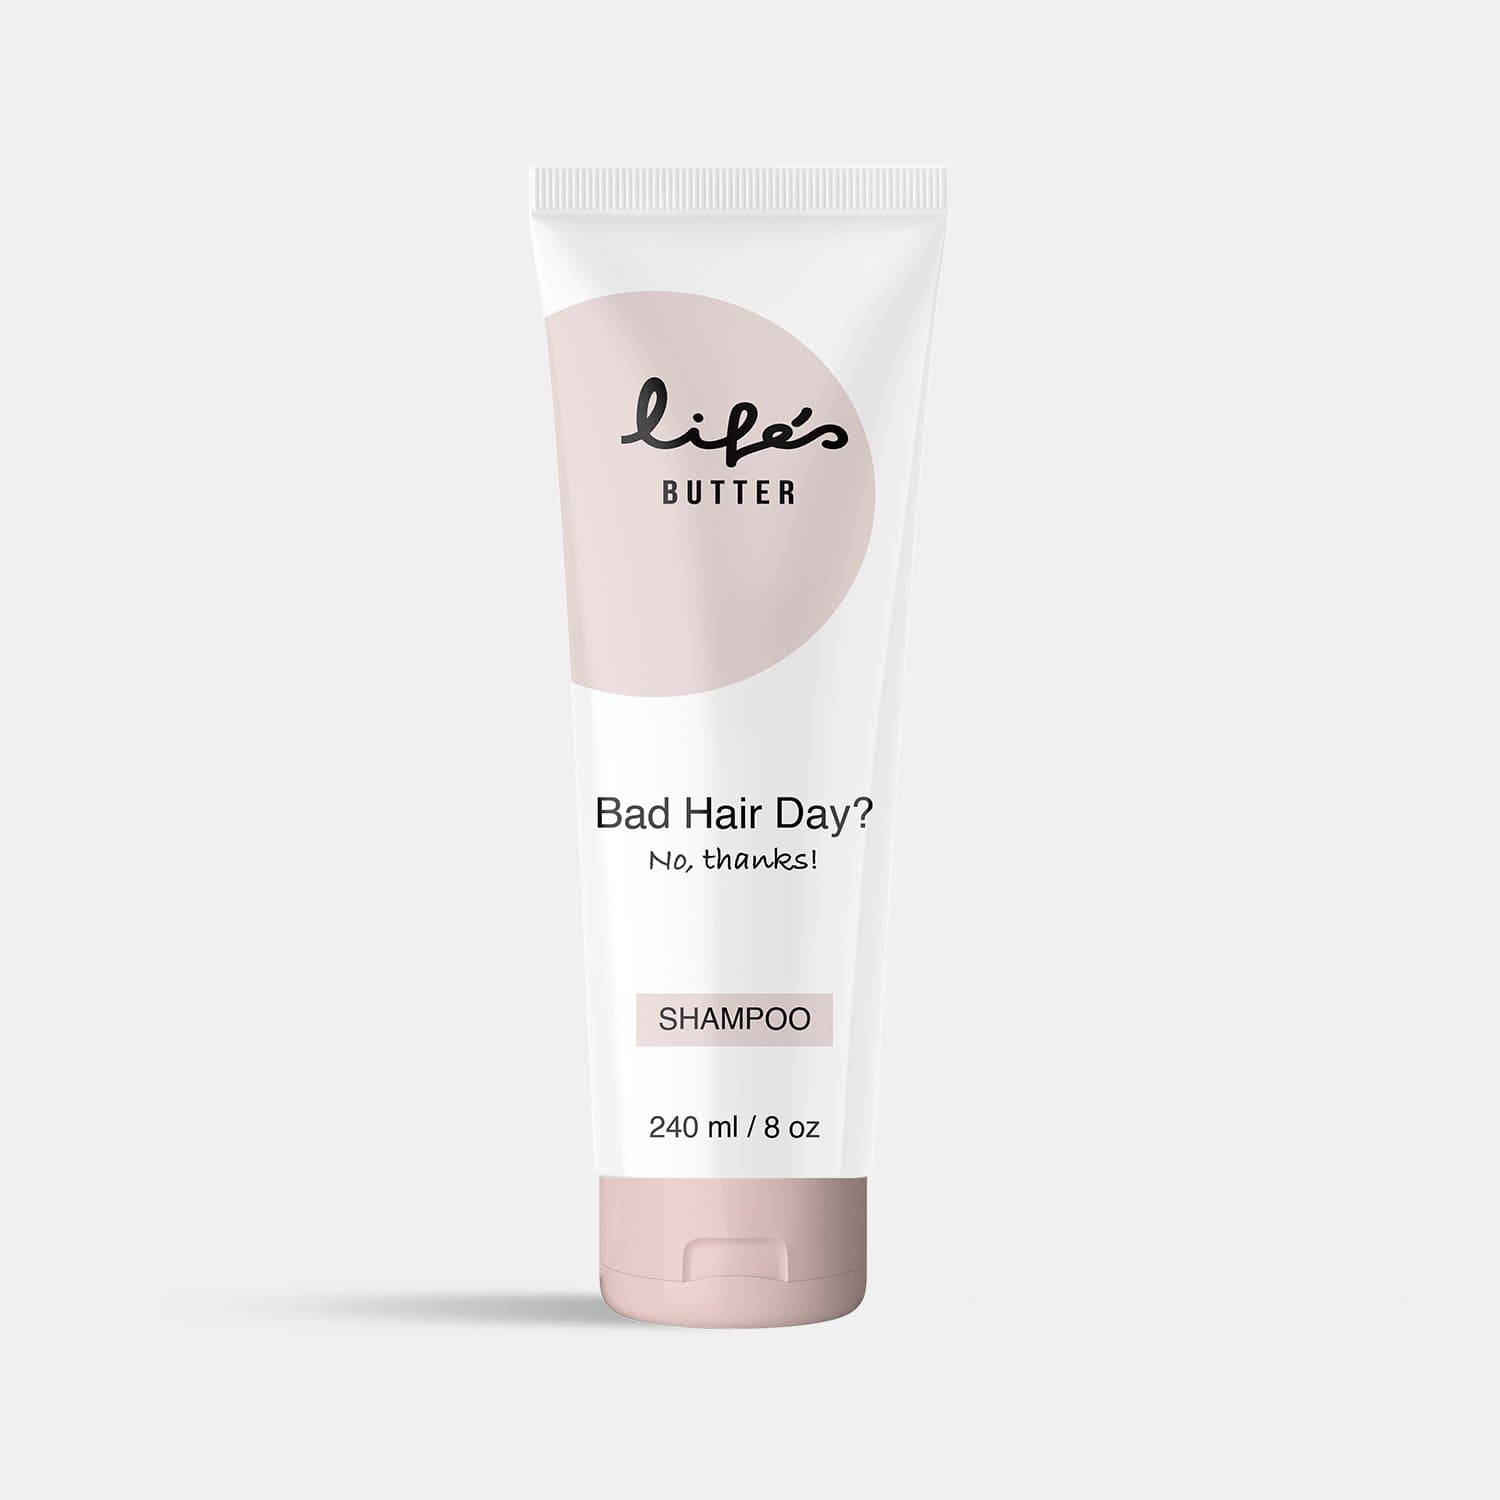 Bad Hair Day Shampoo – Life's Butter